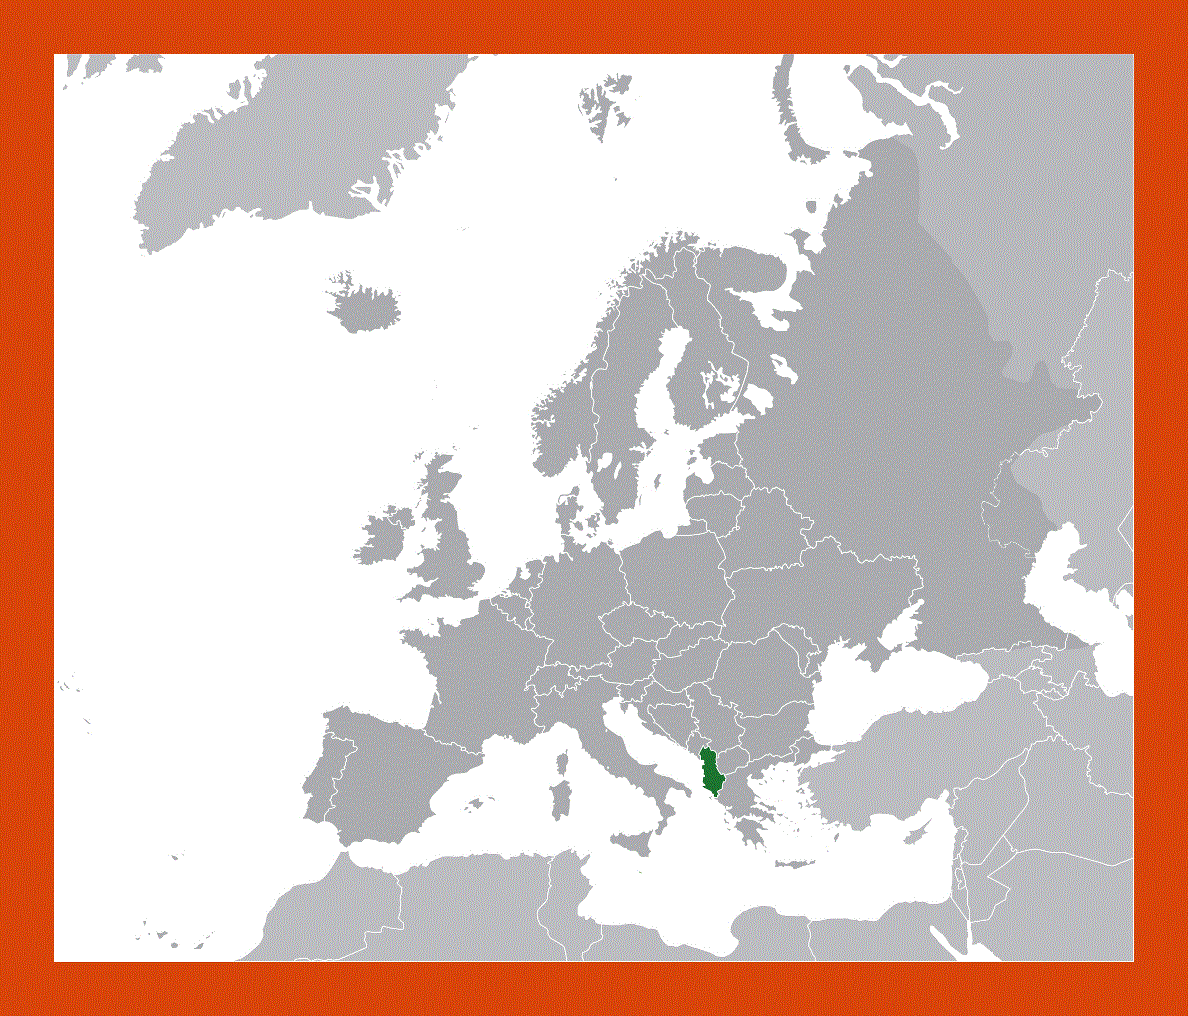 Location map of Albania in Europe